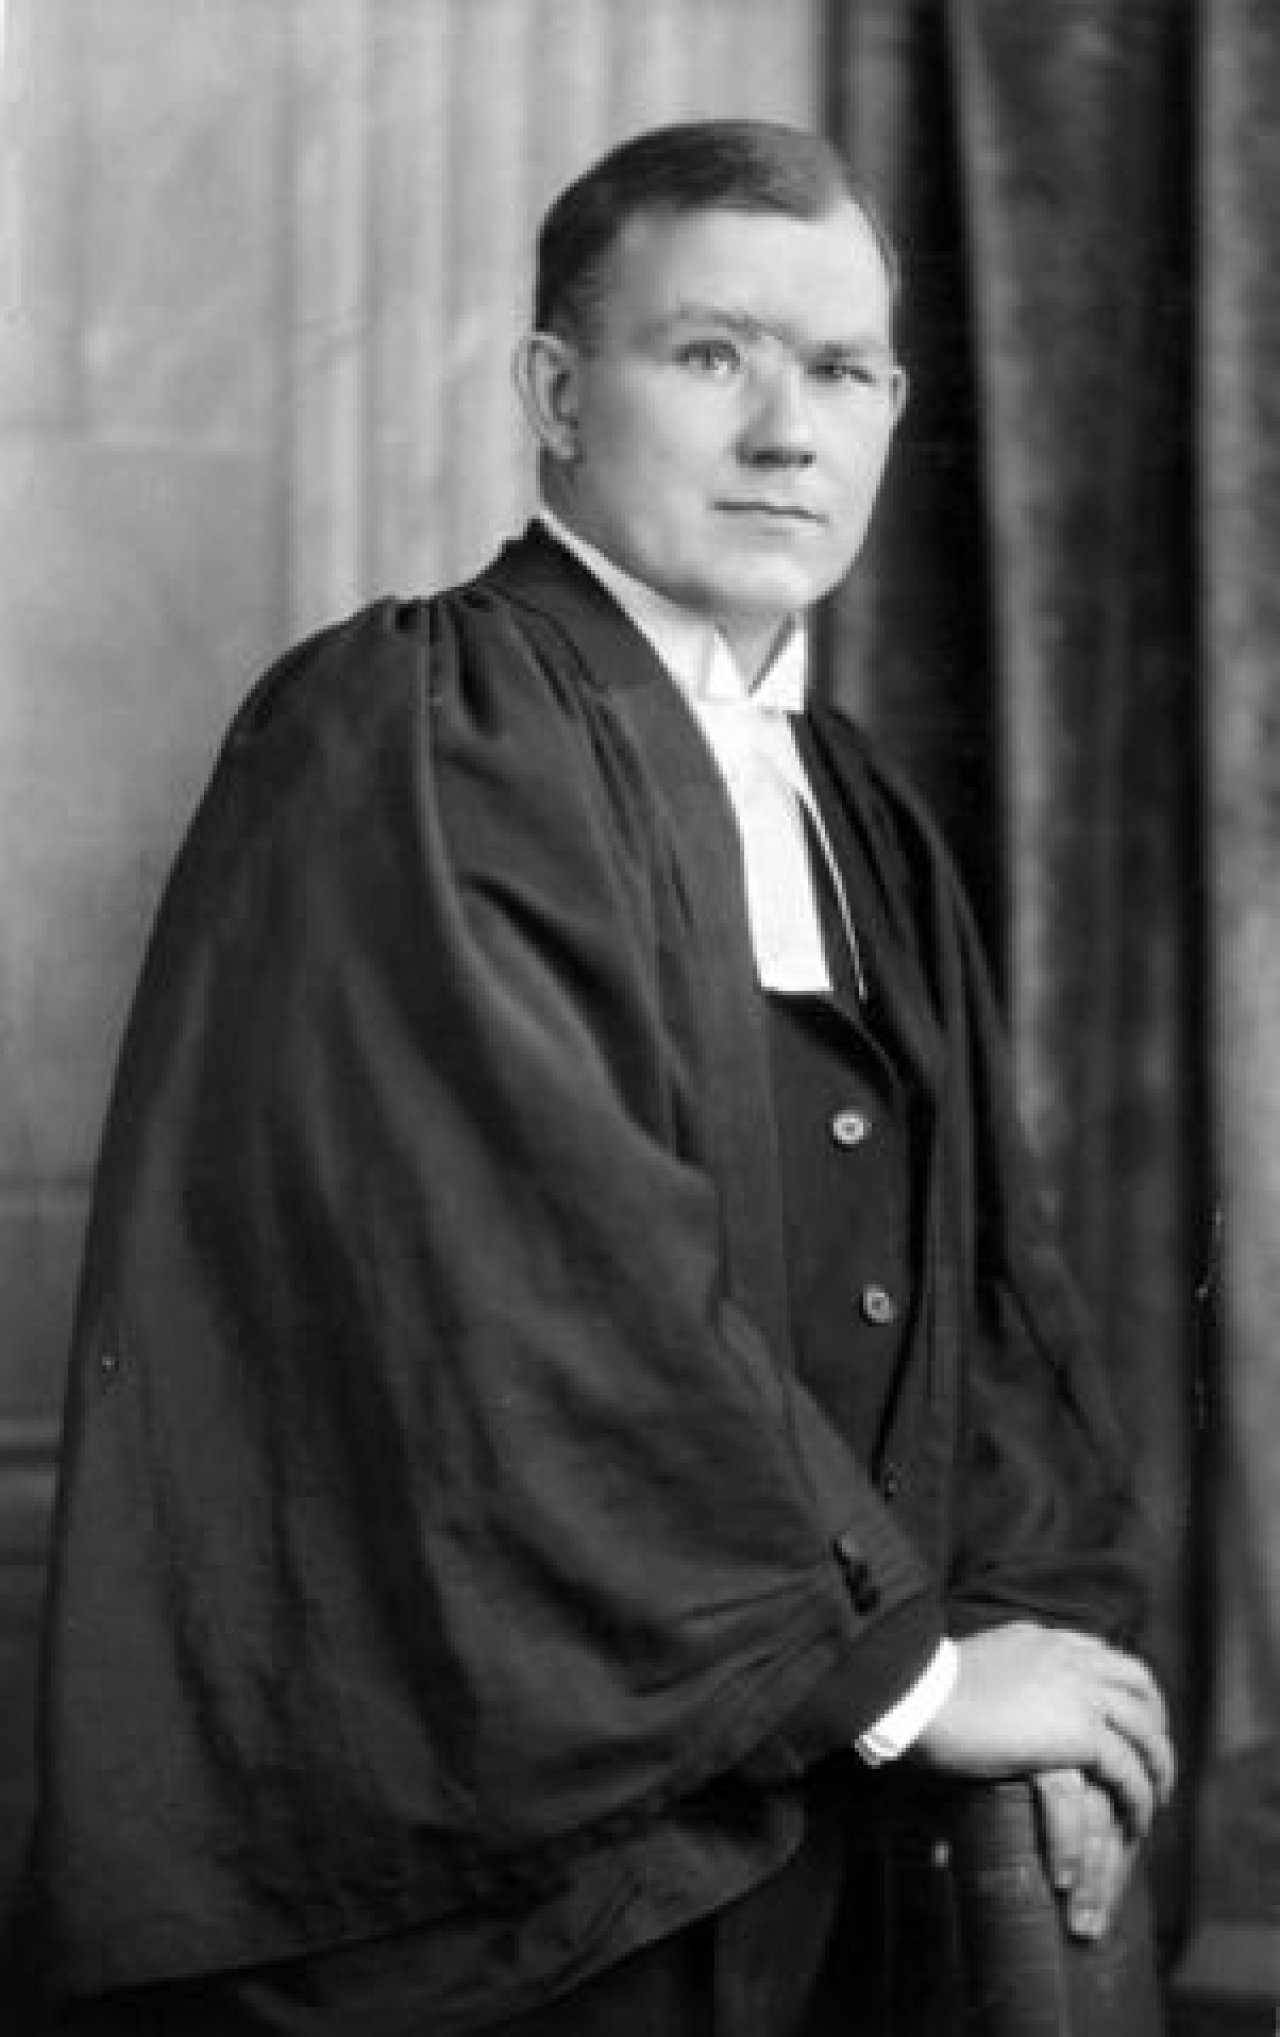 Oscar Orr upon graduating from law school in 1932. Source: City of Vancouver Archives 136-307